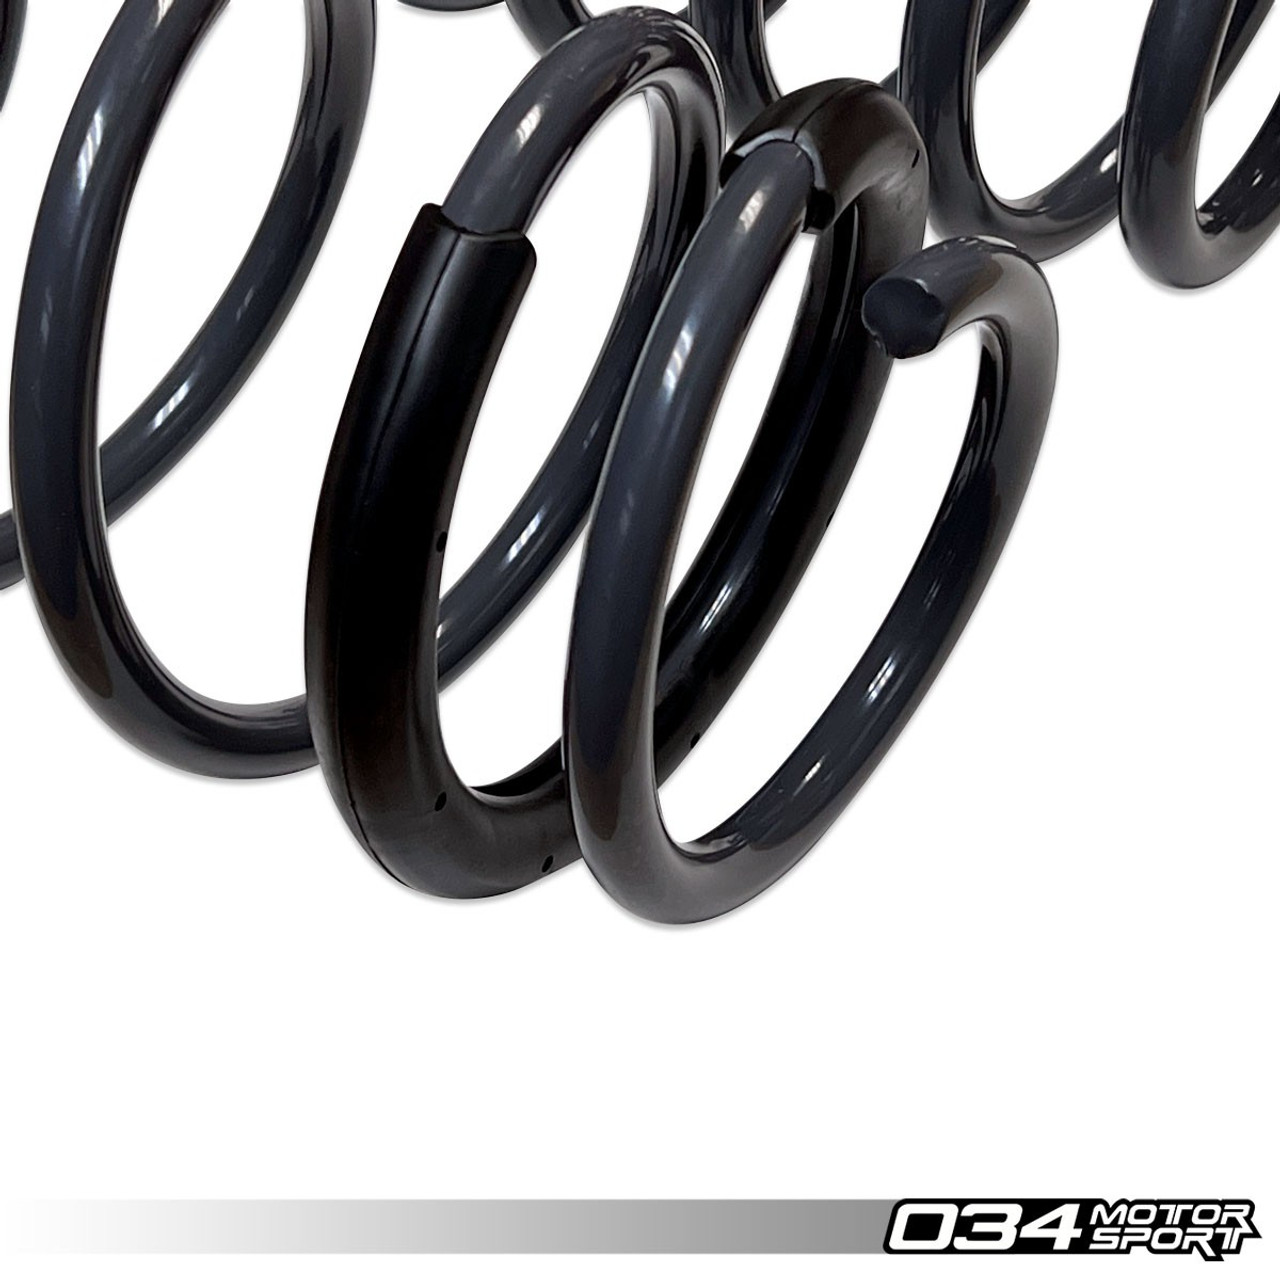 034Motorsport Dynamic+ Lowering Springs for 8V A3/S3 Quattro w/o Mag Ride